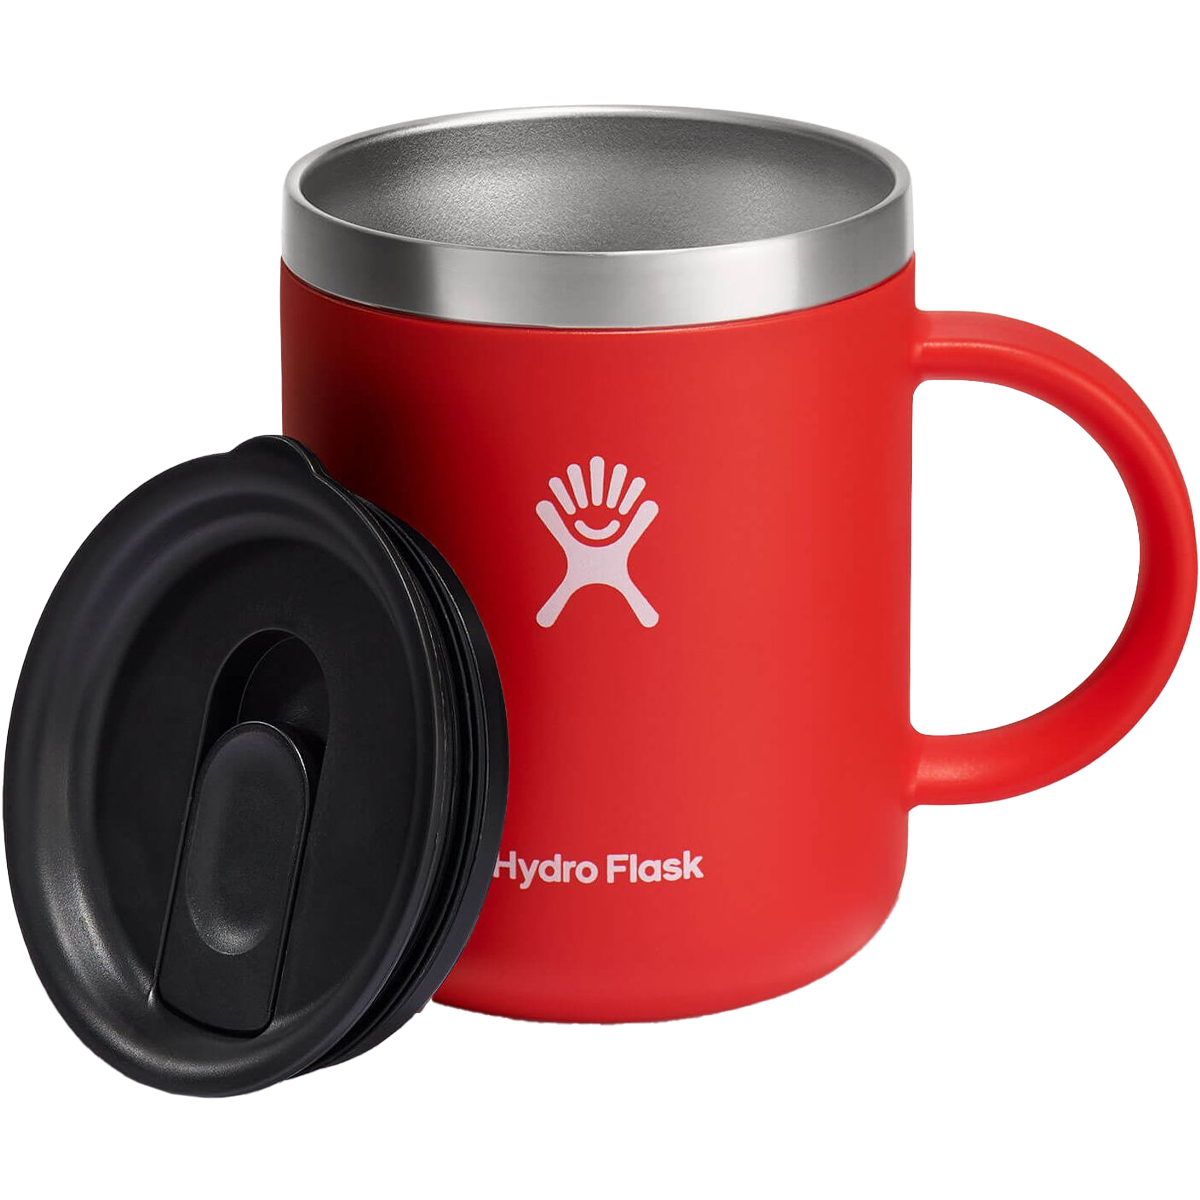 Hydro Flask - Introducing the NEW 12 oz Coffee Mug! ☕️Whether morning will  be spent around a cozy campfire or commuting to the office, our insulated Coffee  Mug is here to make